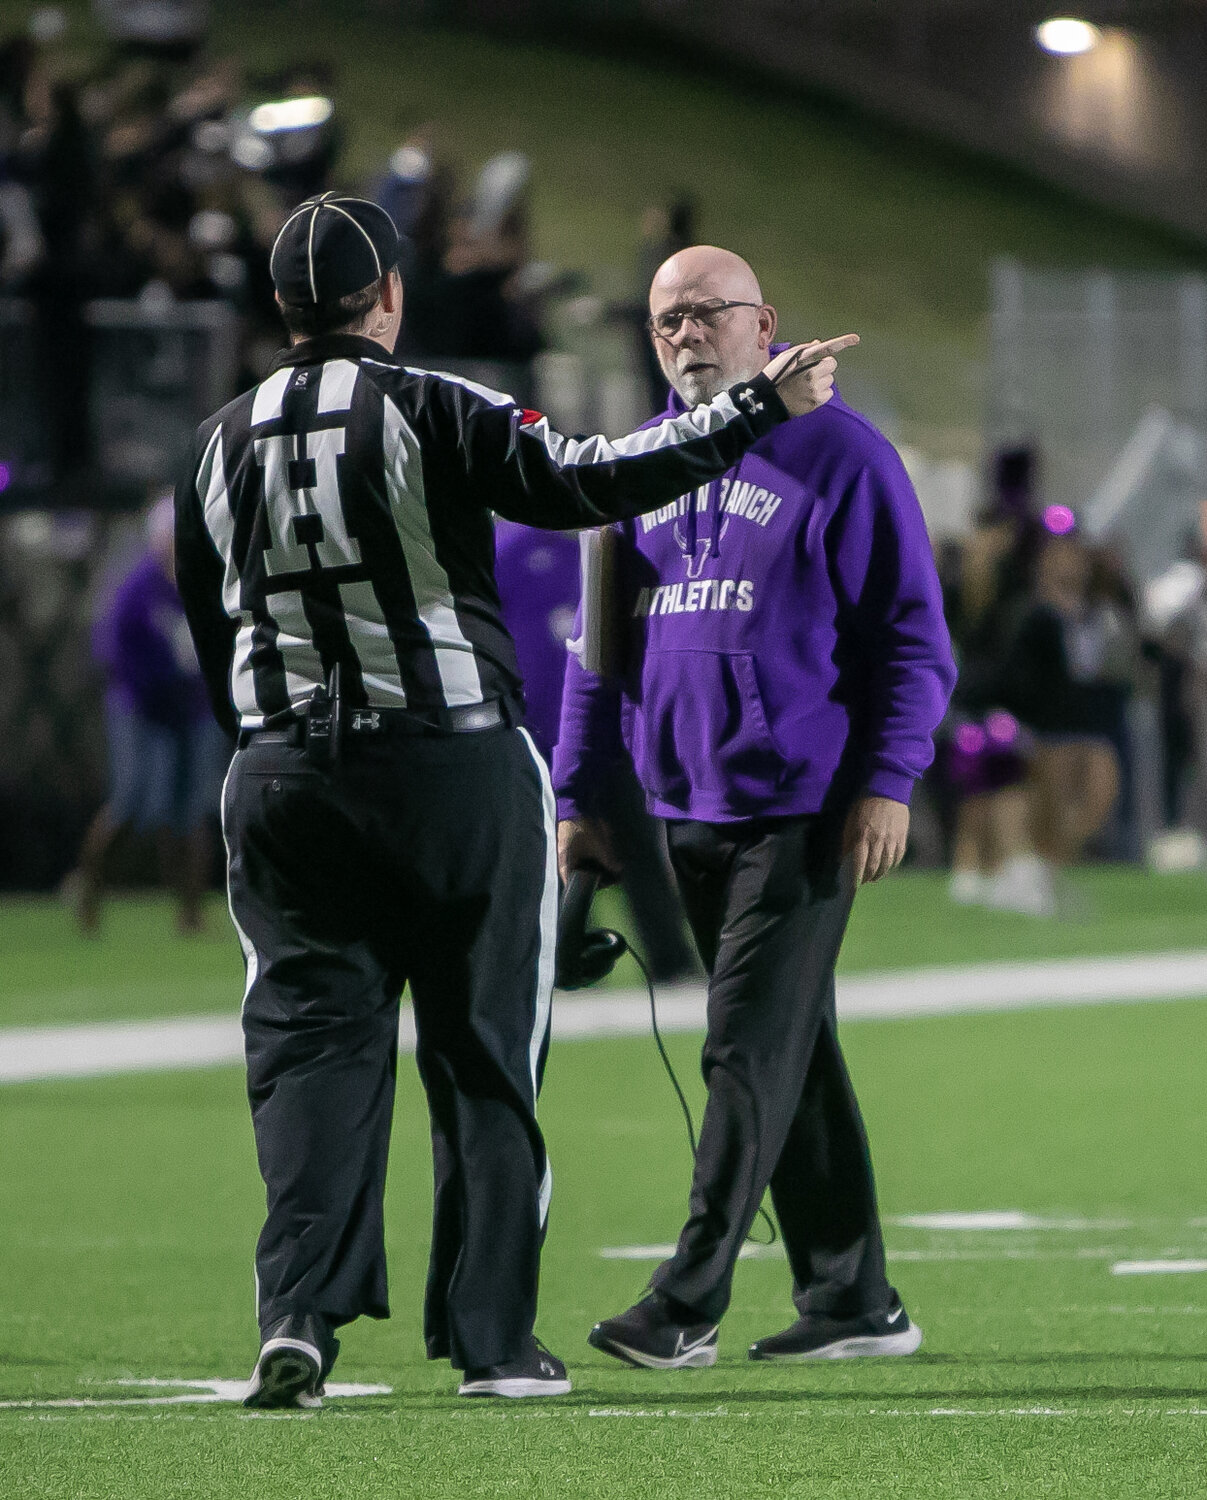 Morton Ranch head coach Ron Counter talks to a referee during Thursday's game between Jordan and Morton Ranch at Legacy Stadium.